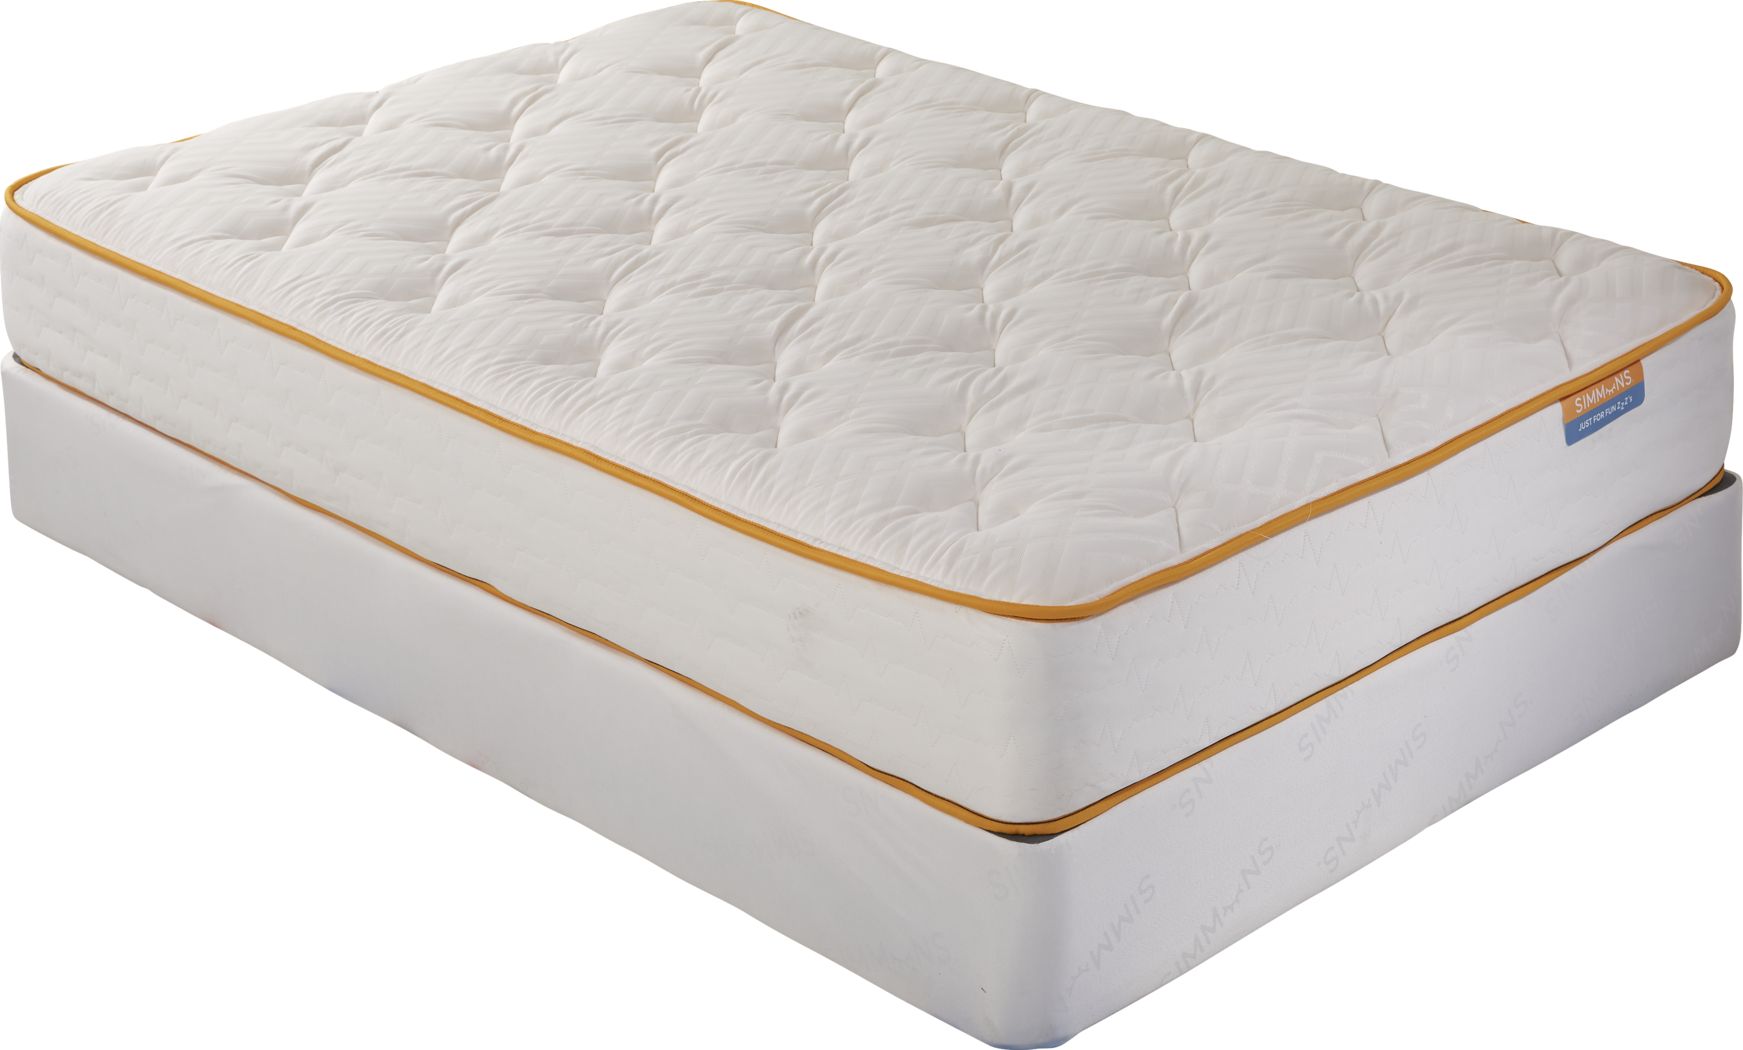 simmons king size mattress review